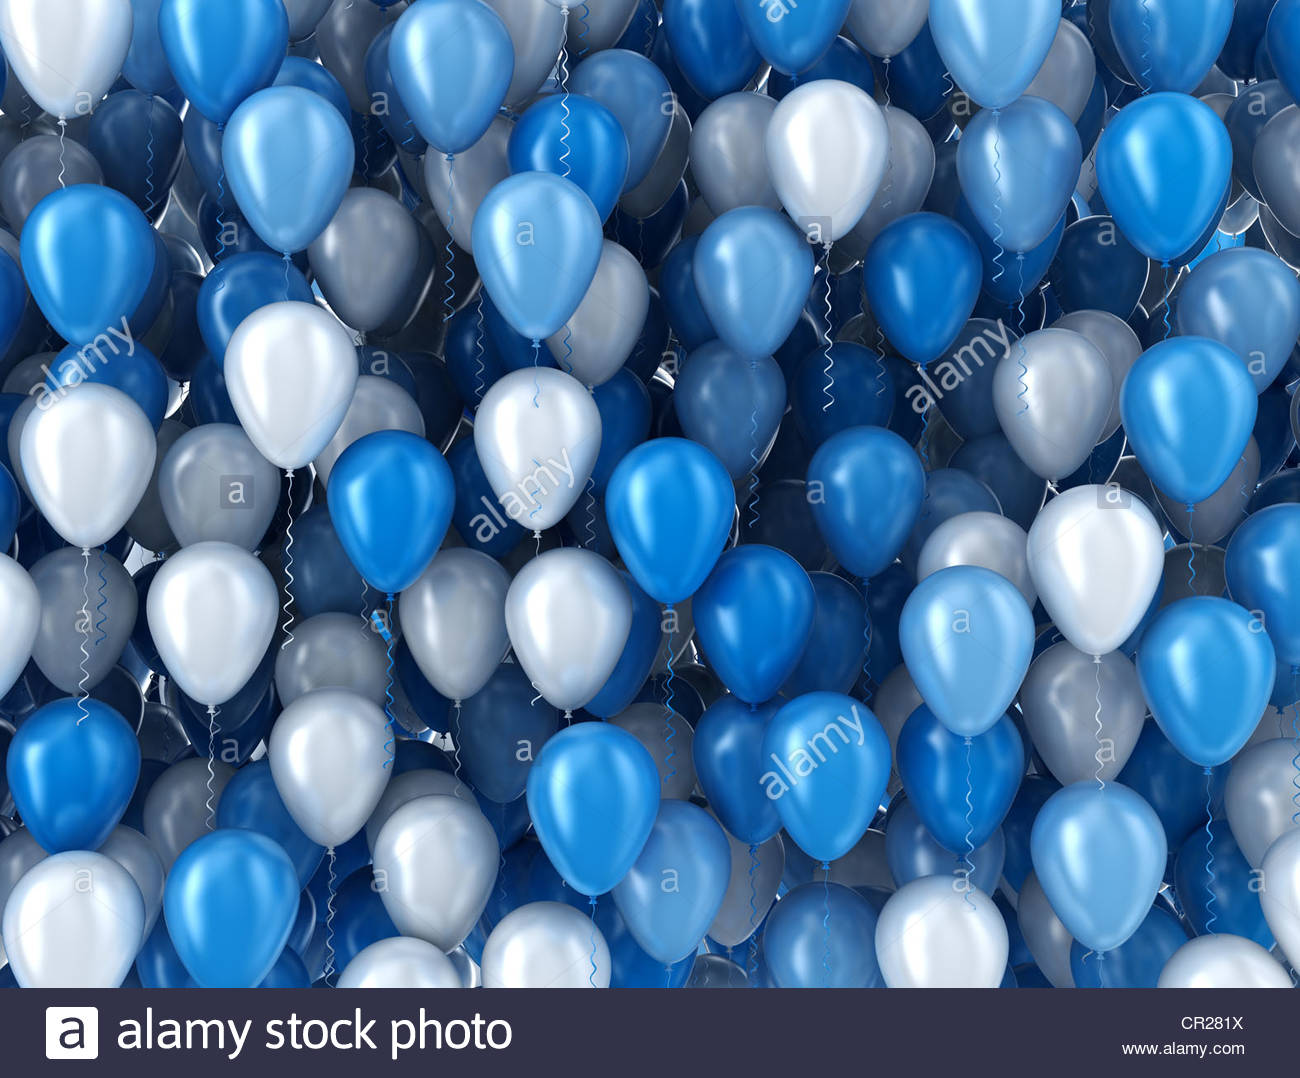 Blue And White Balloons Background Stock Photo